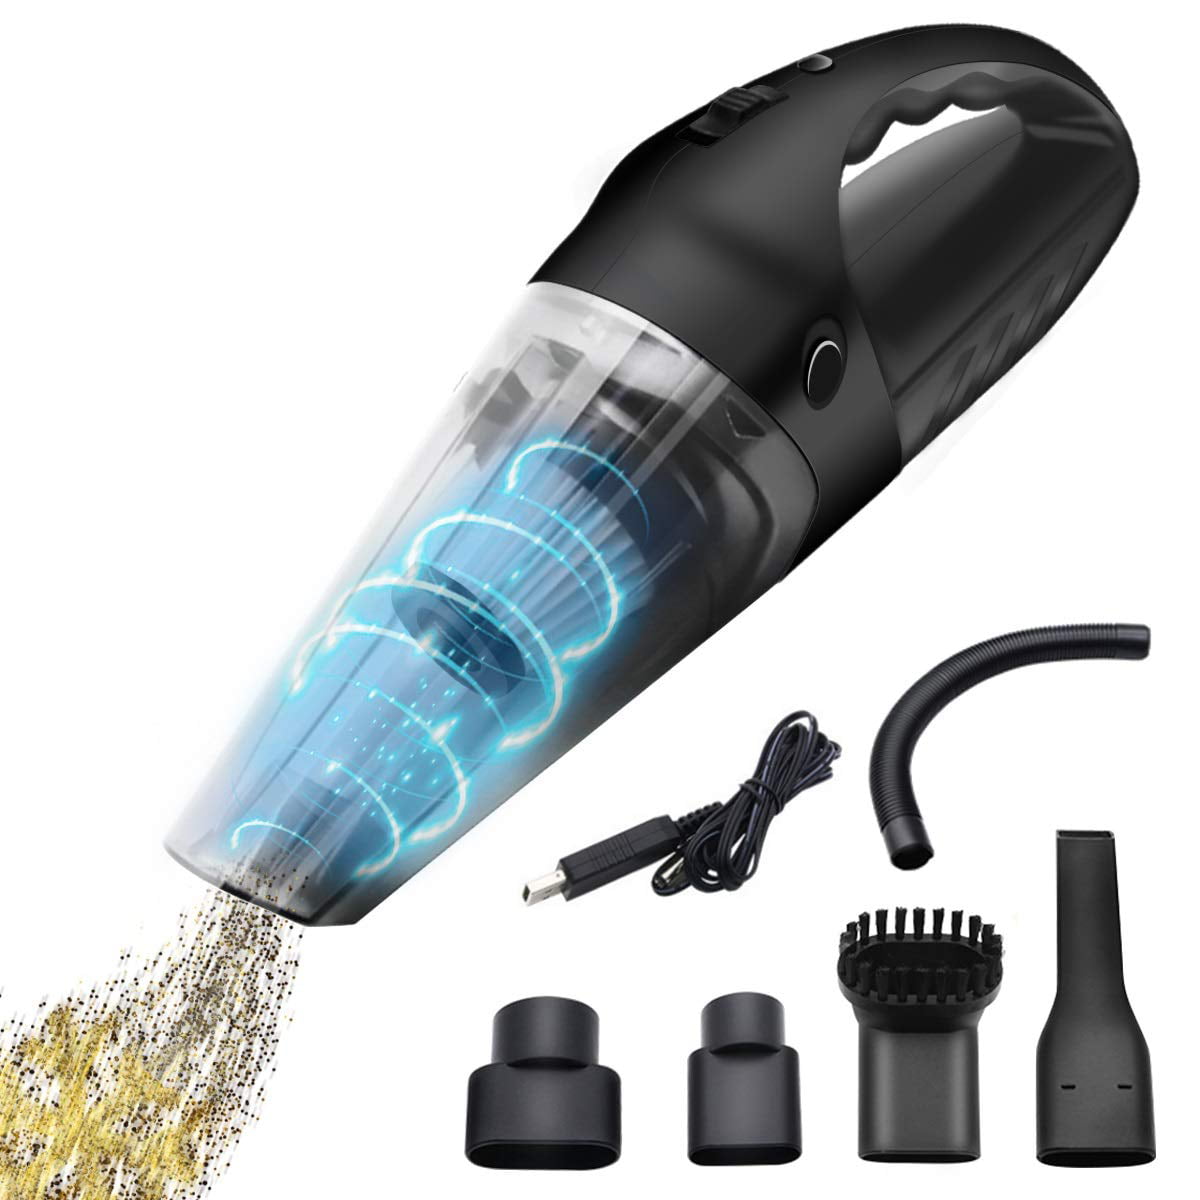 Portable Cordless Car Vacuum Cleaner Rechargeable XTAUTO Lightweight Handheld Vacuum Cleaner for Car/Home/Office Cleaning Wet/Dry Use with 60W High Power 6000Pa Strong Suction Li-ion Battery 